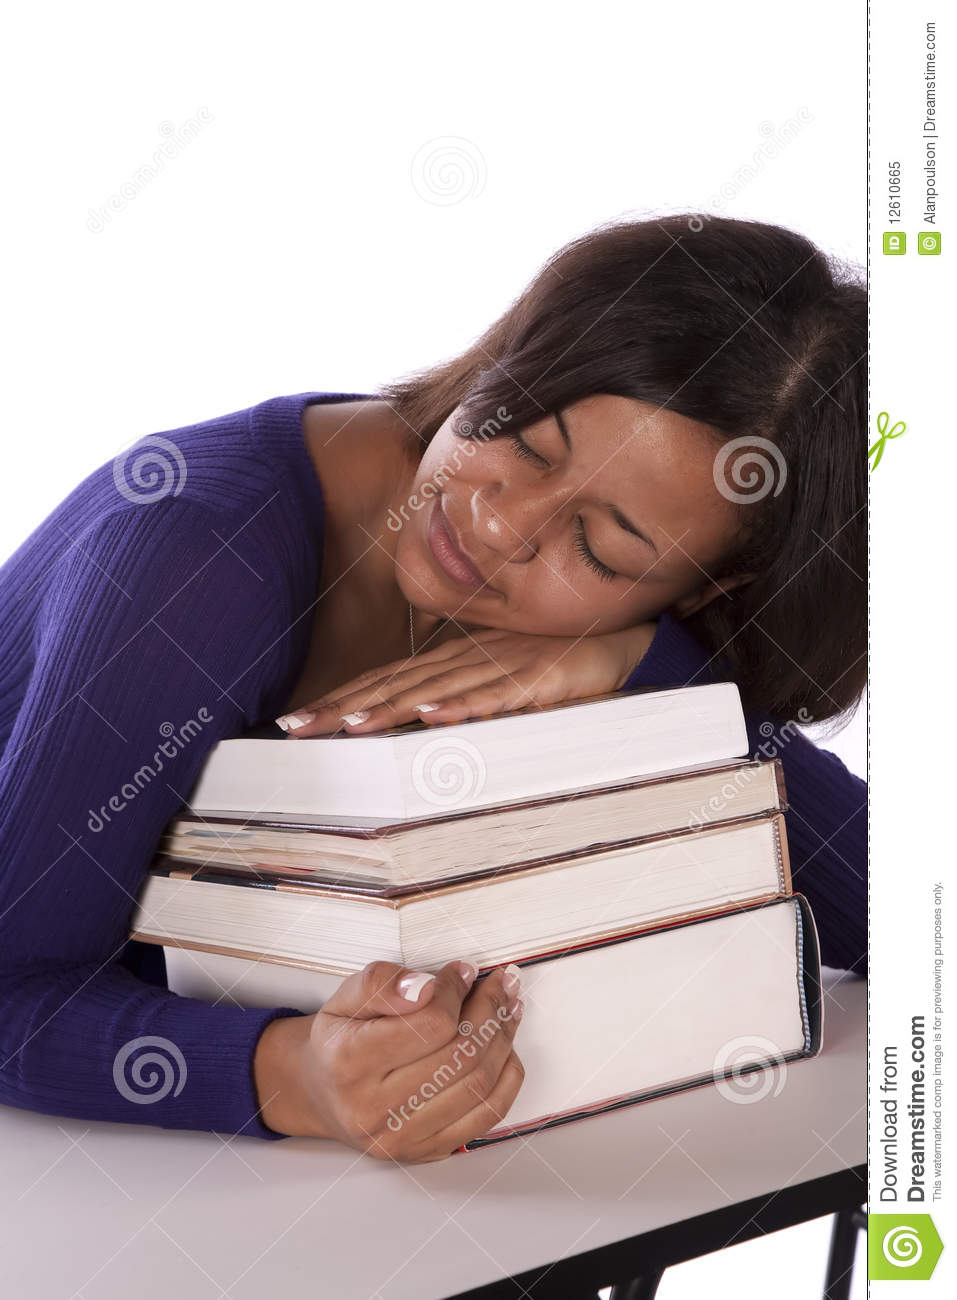 Exhausted Student Royalty Free Stock Photo   Image  12610665